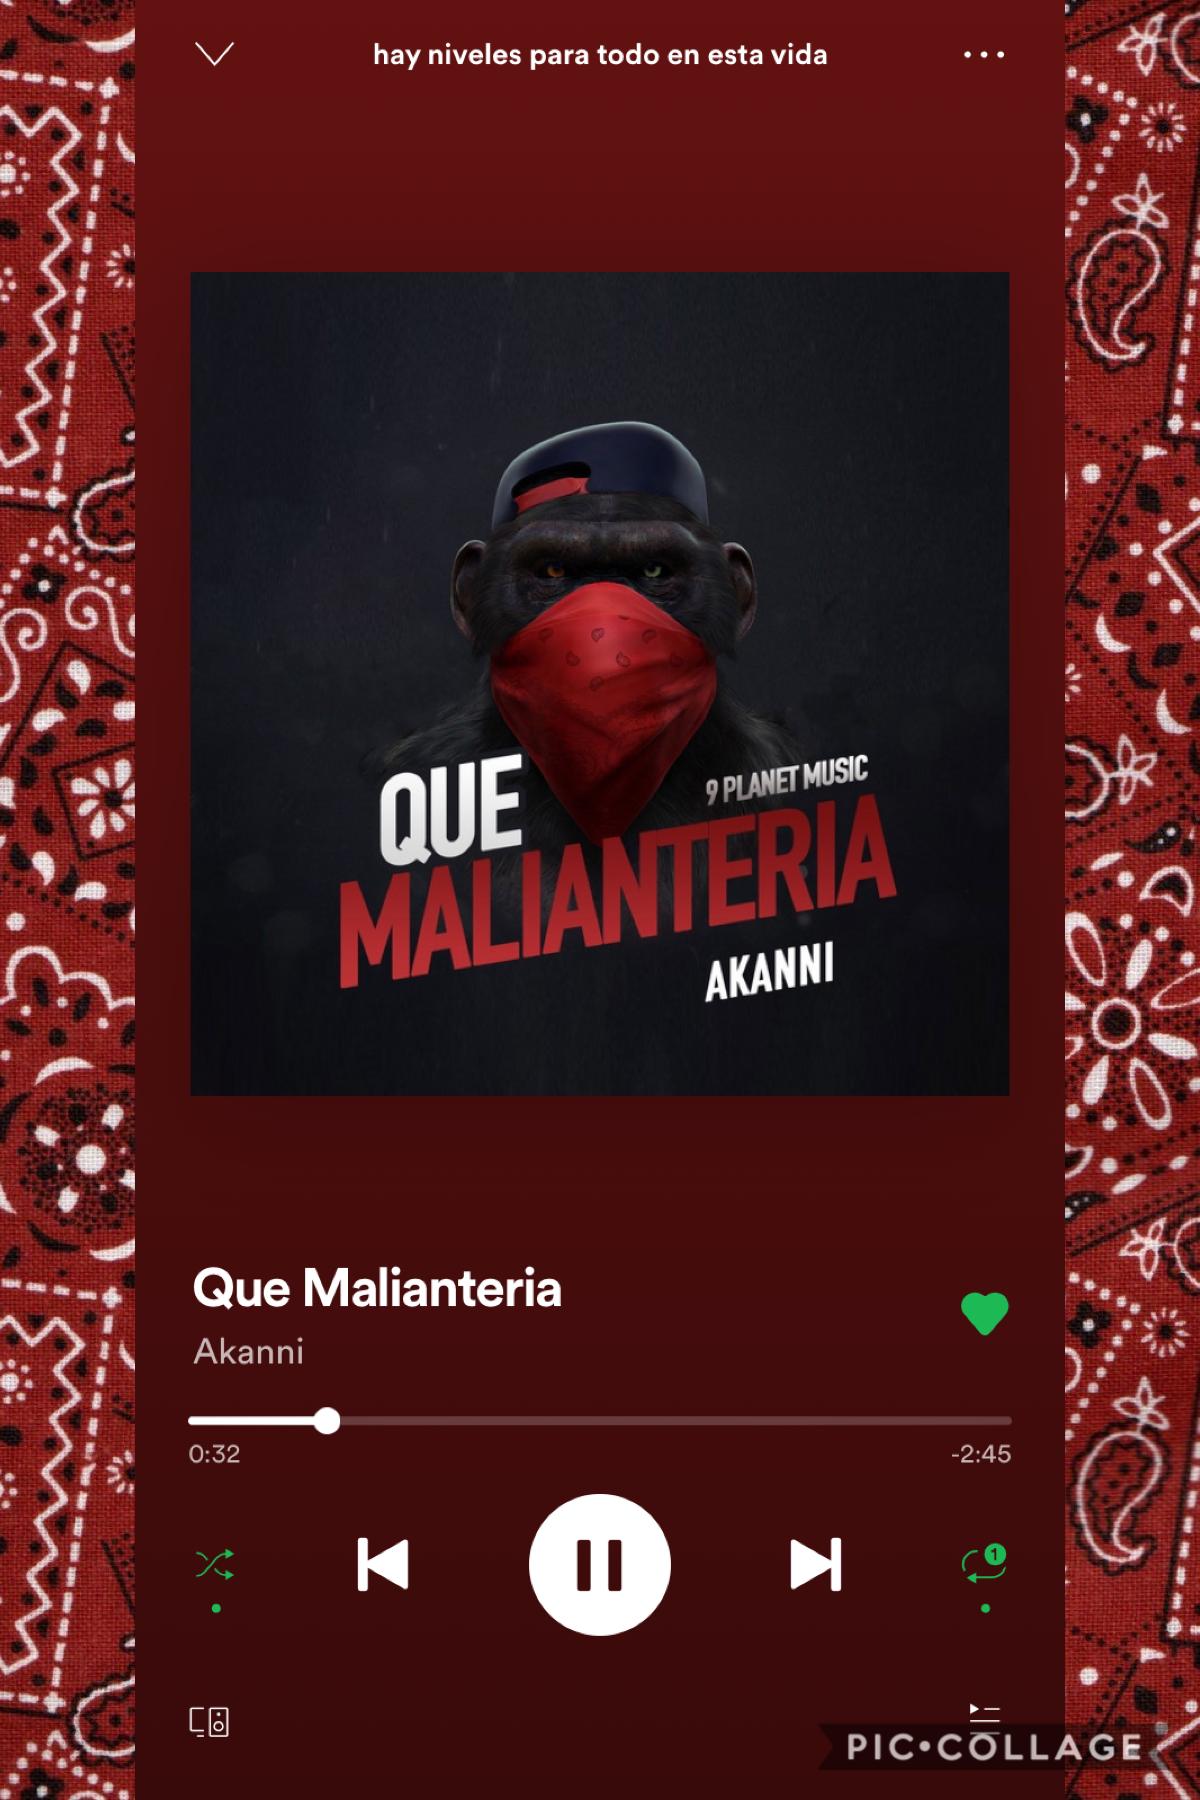 bro if i could listen to only one song for the rest of the year: it’d be this one 😫💖 akanni too be representing Panama like 🤩✨ promise i’ll stop bothering you with songs but like this one’s from Panama too 🥺👉🏽👈🏽—love you 😂🇵🇦 